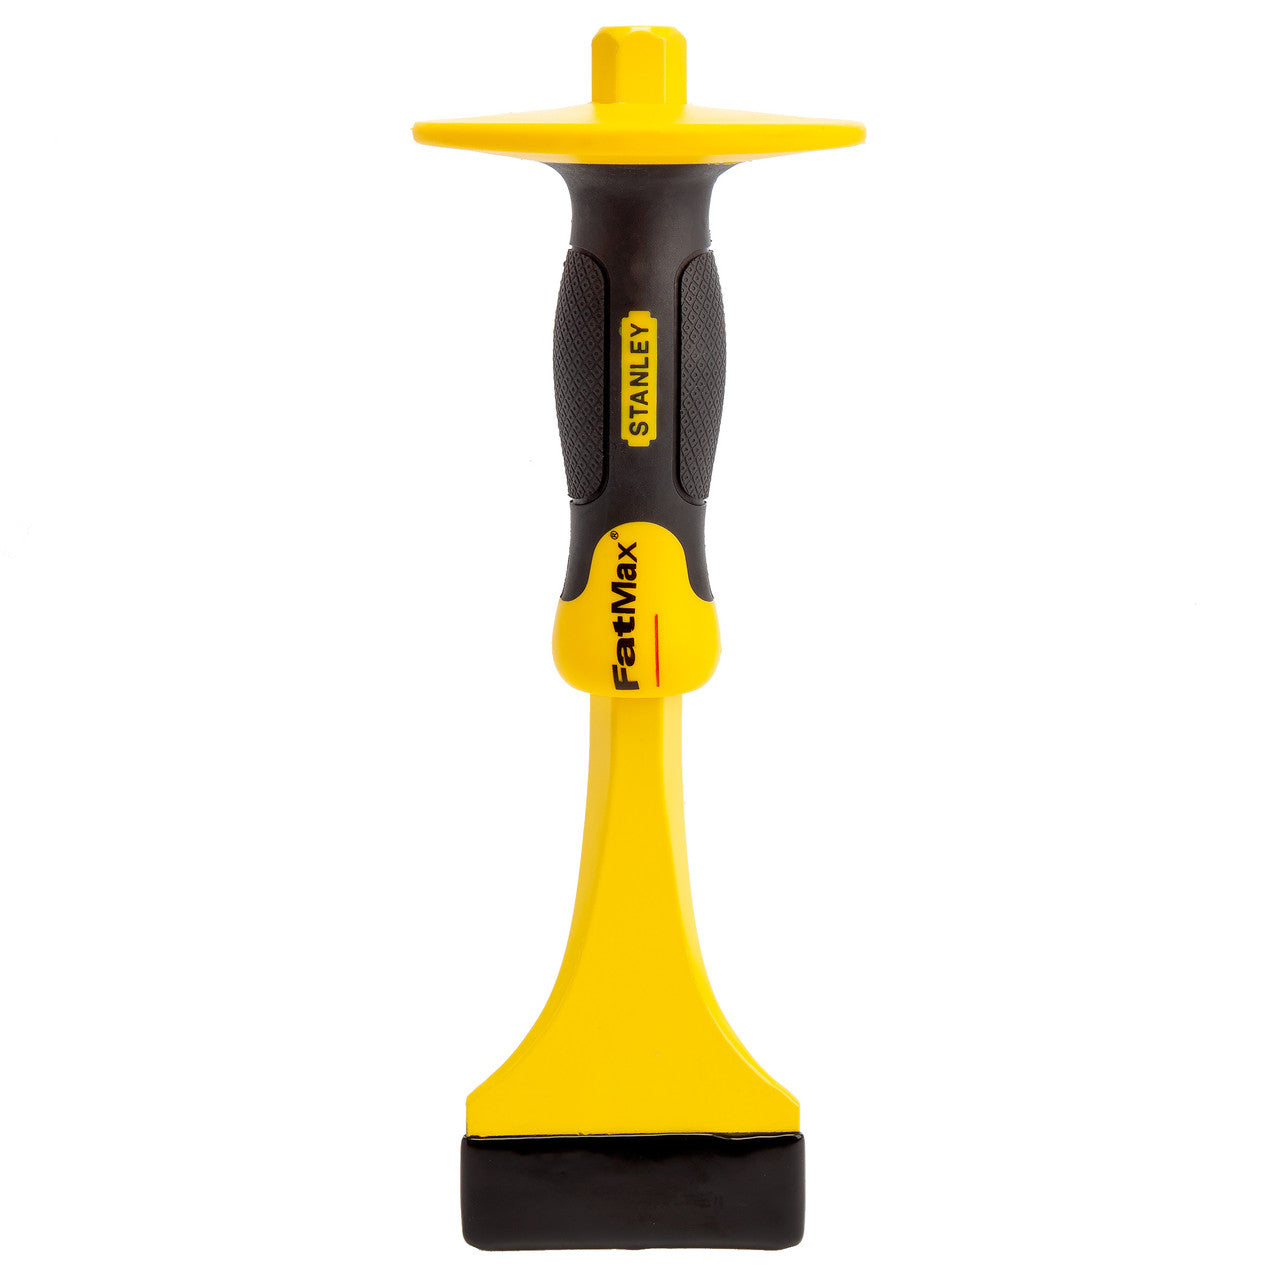 Stanley 4-18-331 Fatmax Floor Chisel with Guard 75mm